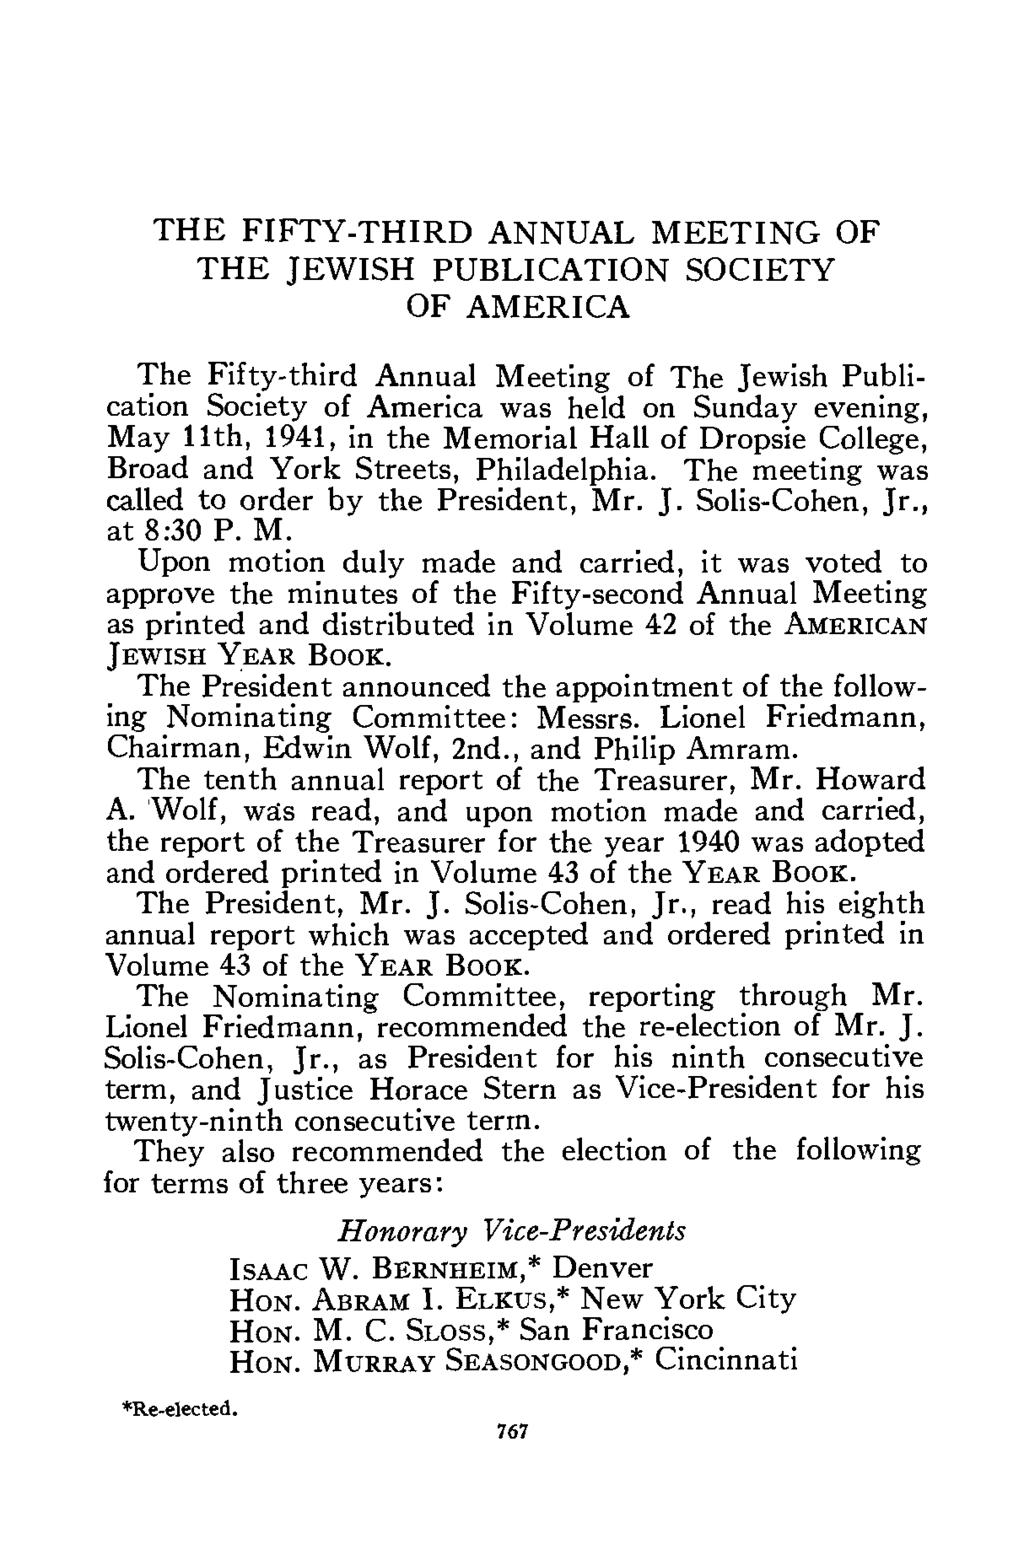 THE FIFTY-THIRD ANNUAL MEETING OF THE JEWISH PUBLICATION SOCIETY OF AMERICA The Fifty-third Annual Meeting of The Jewish Publication Society of America was held on Sunday evening, May 11th, 1941, in